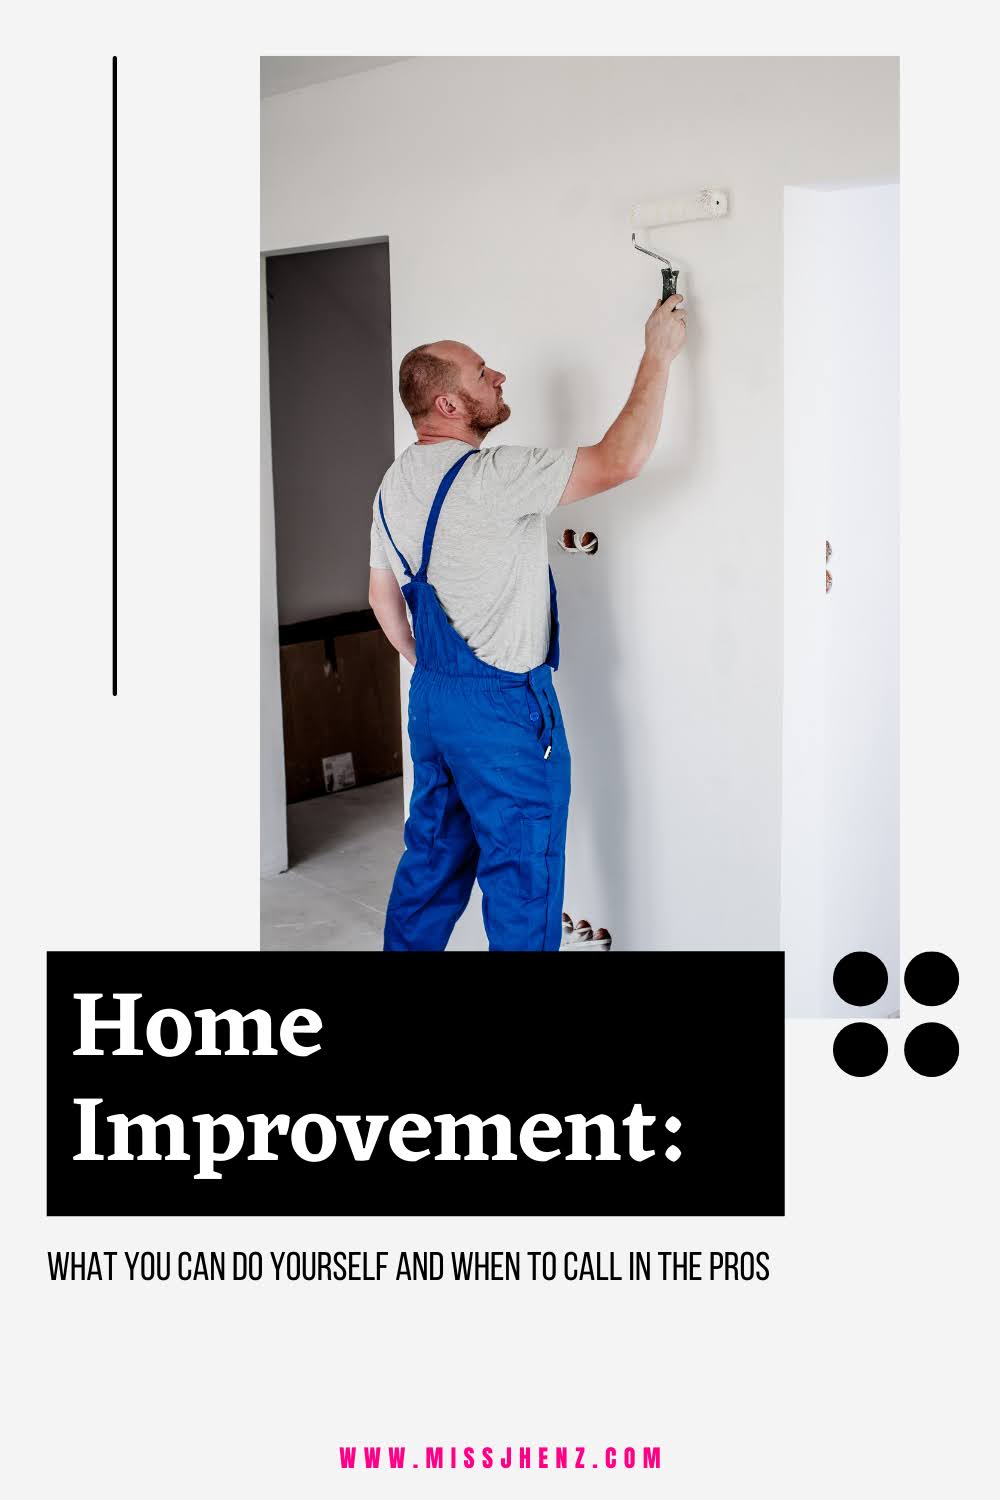 Home Improvement: What You Can Do Yourself And When To Call In The Pros